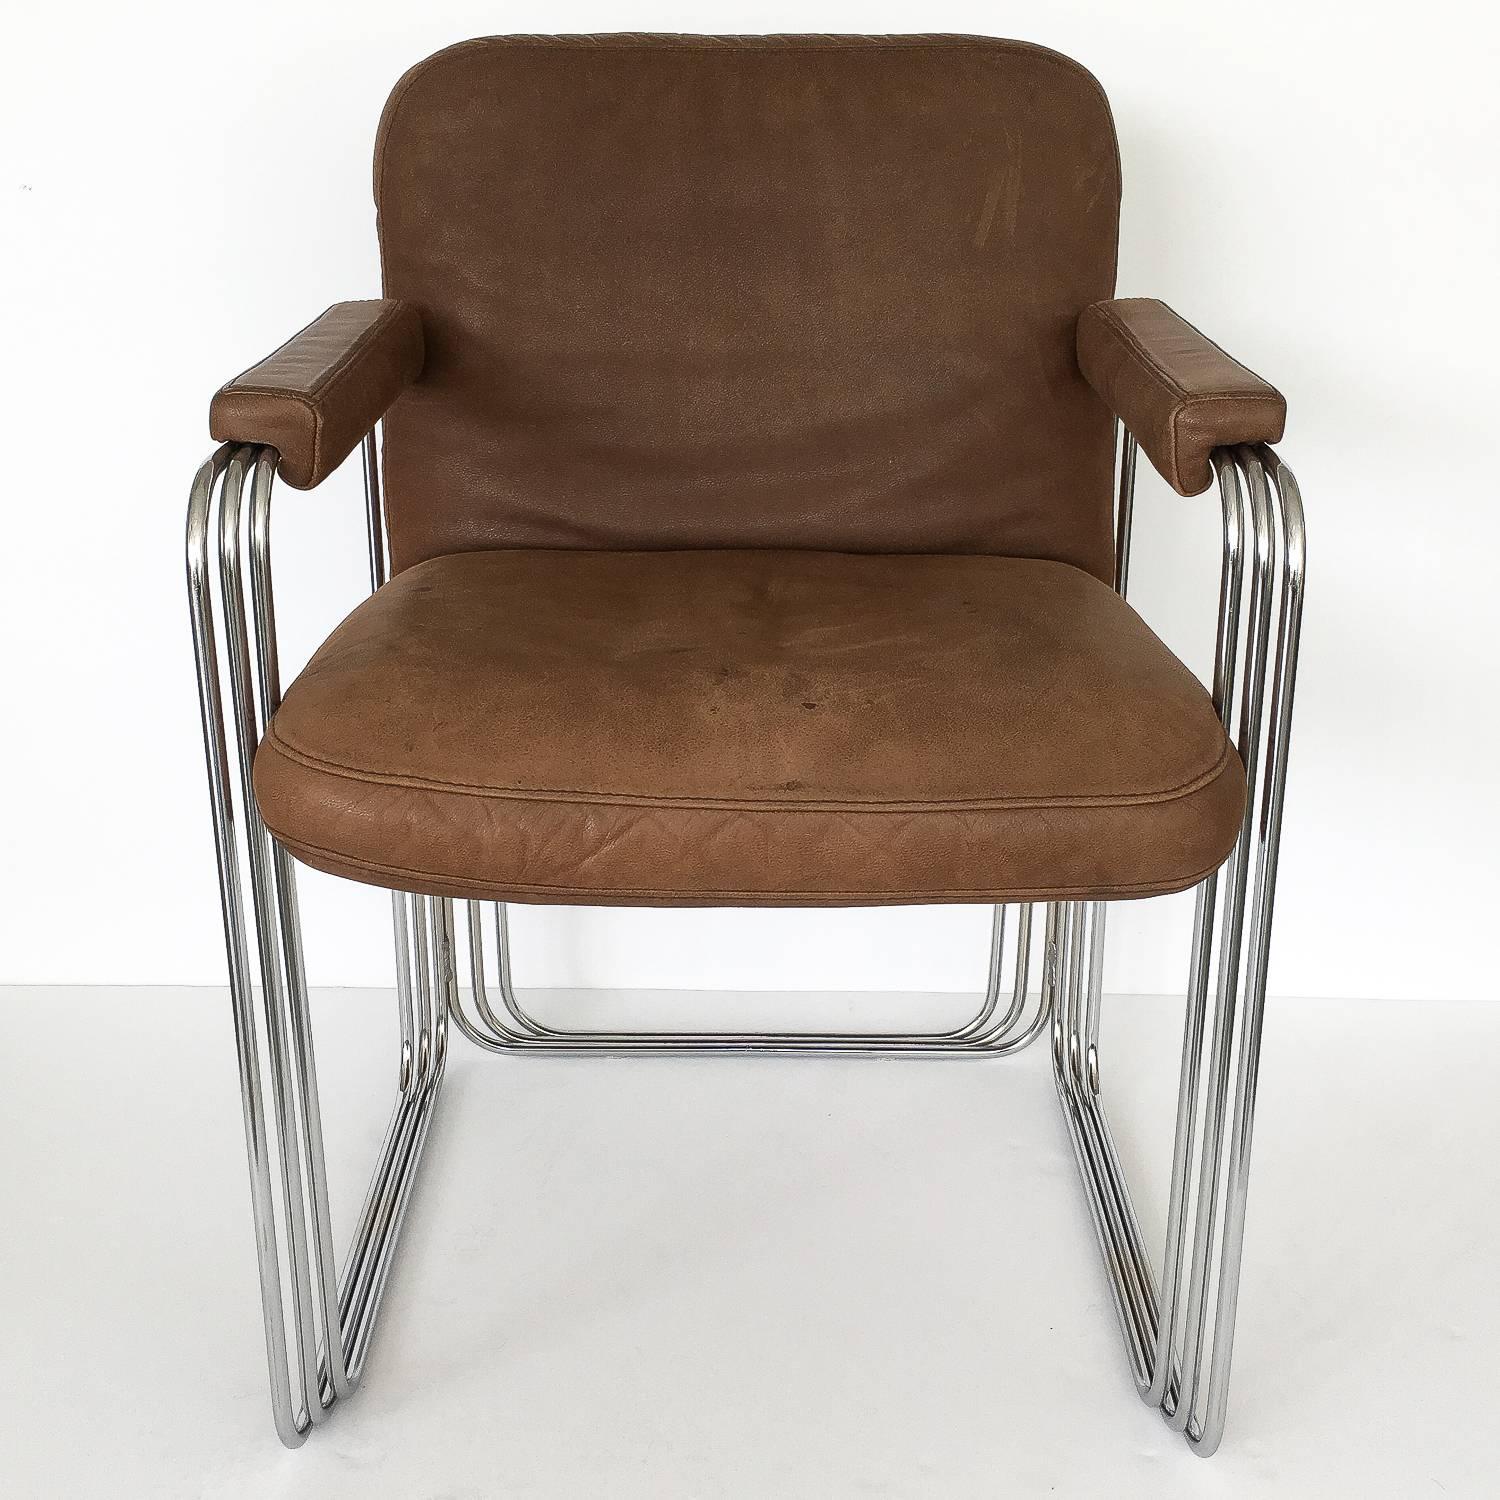 Set of six unique chrome frame and brown leather dining armchairs, circa 1970s. These chairs feature a stacked and stepped chrome plated steel sculptural frame. The frame of the chairs creates a three dimensional cage-like rectangular frame on three